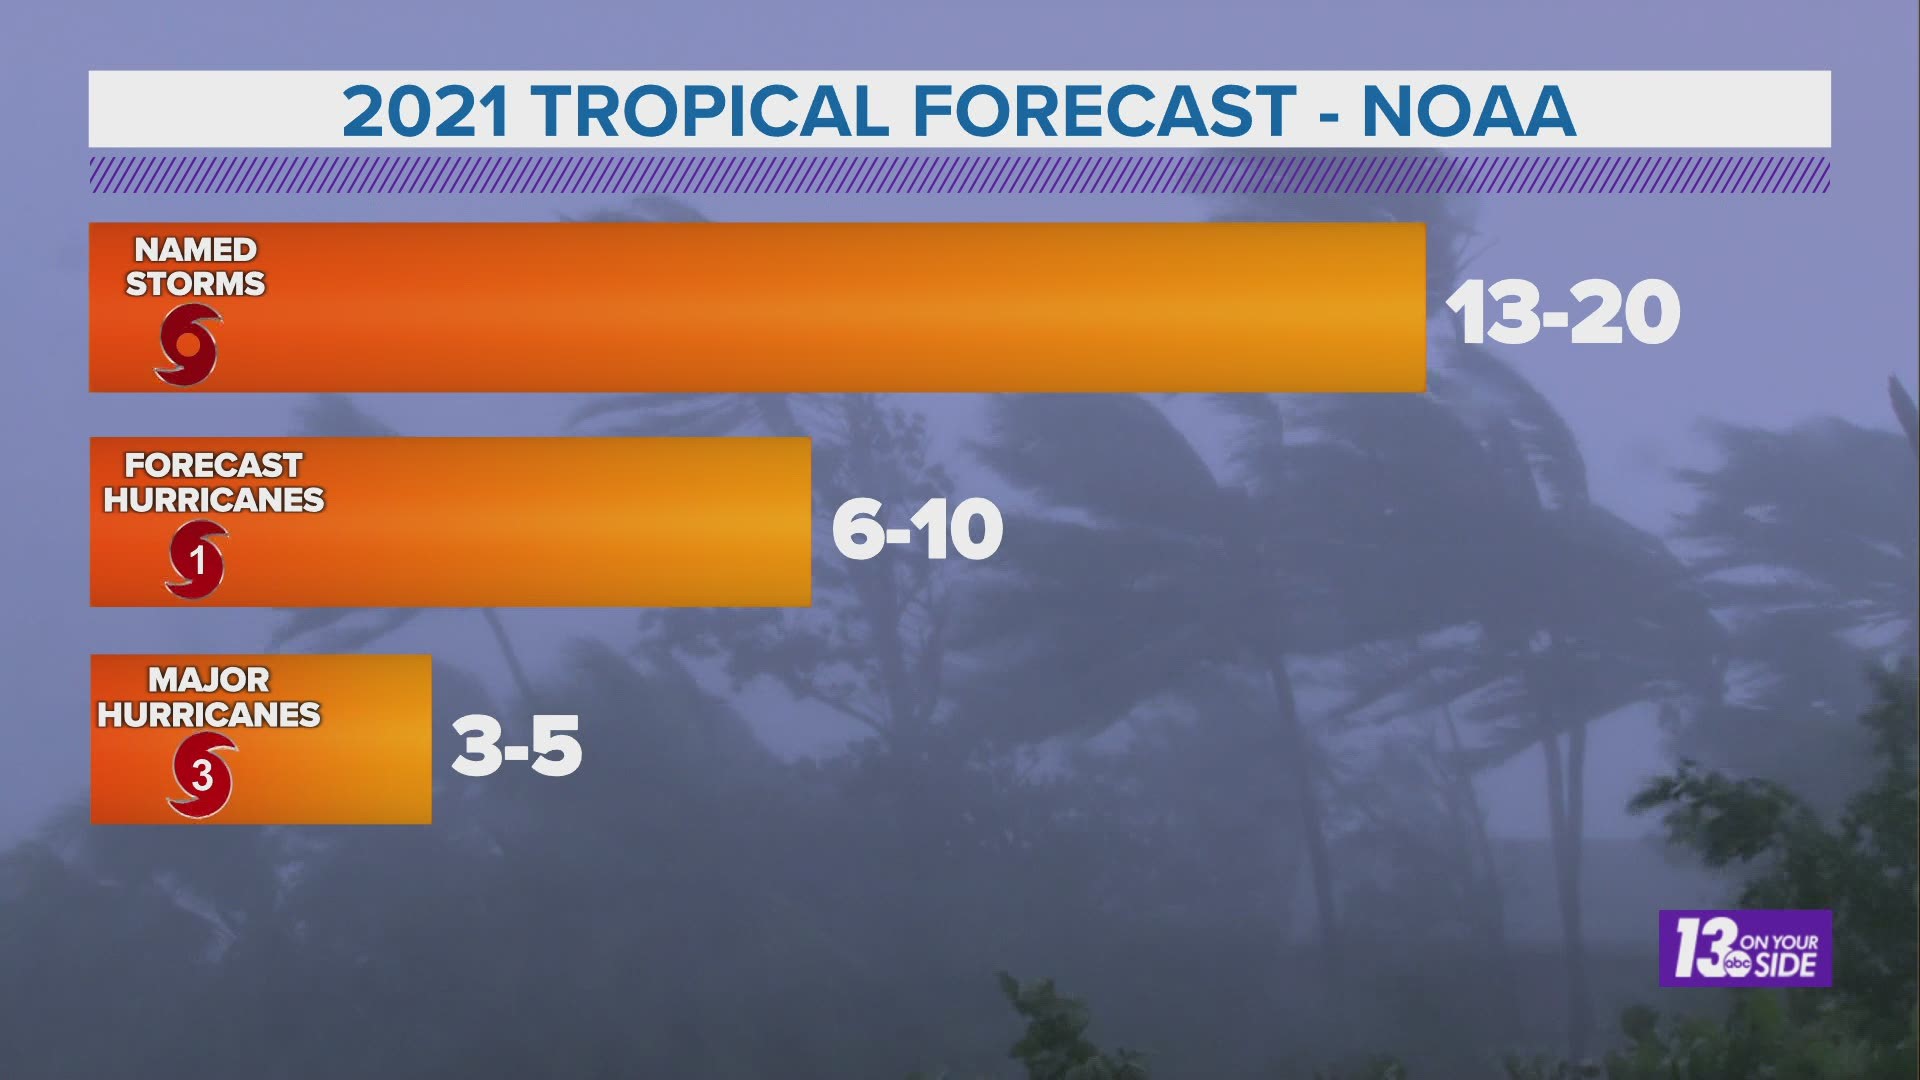 Forecasters for NOAA released their 2021 Hurricane Season Forecast today. Meteorologist Michael Behrens breaks it down!